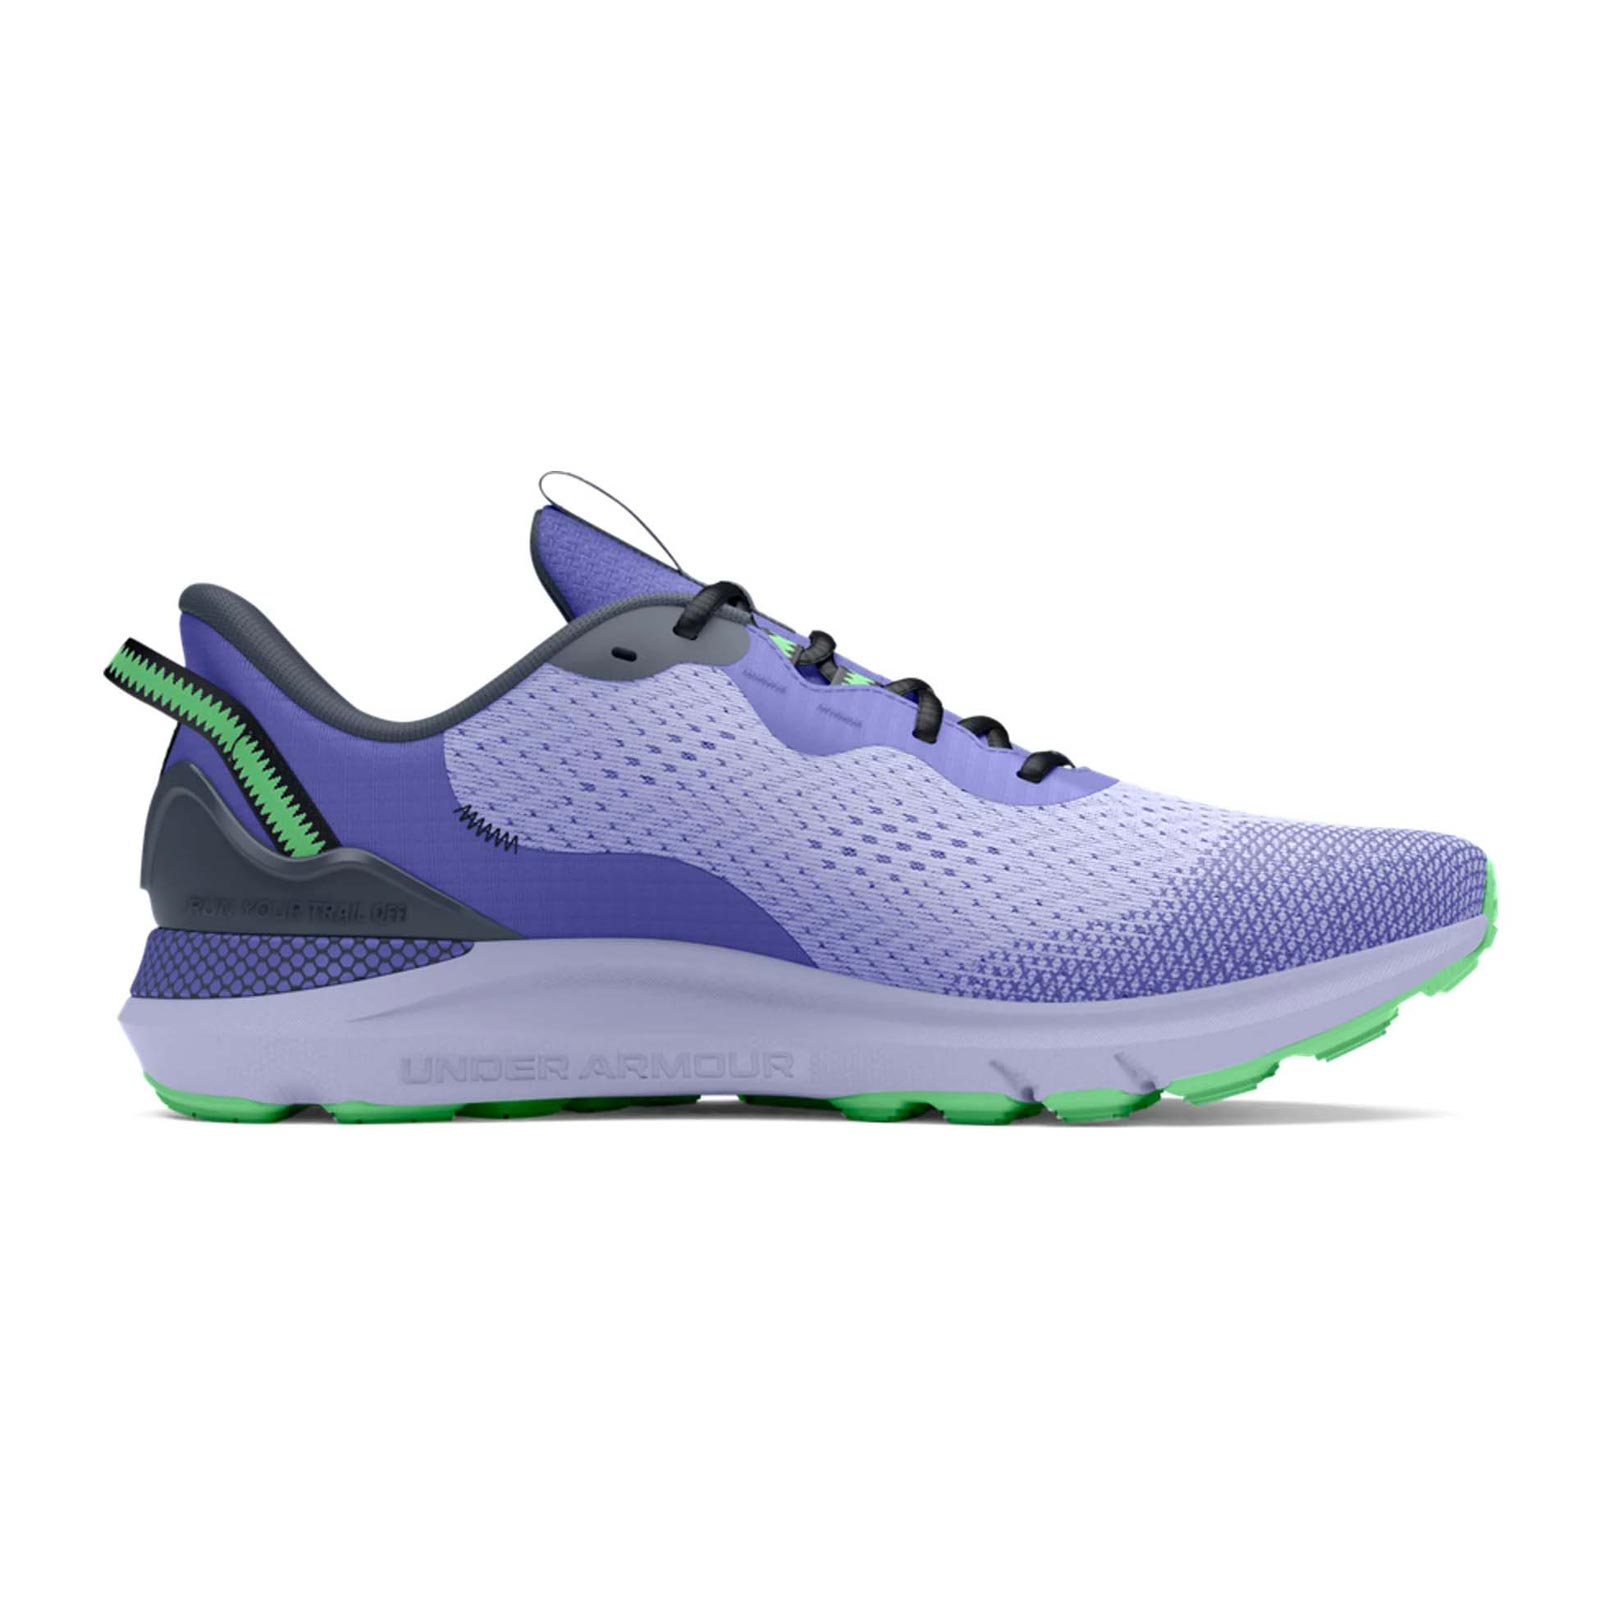 UNDER ARMOUR U SONIC WOMENS TRAIL RUNNING SHOES